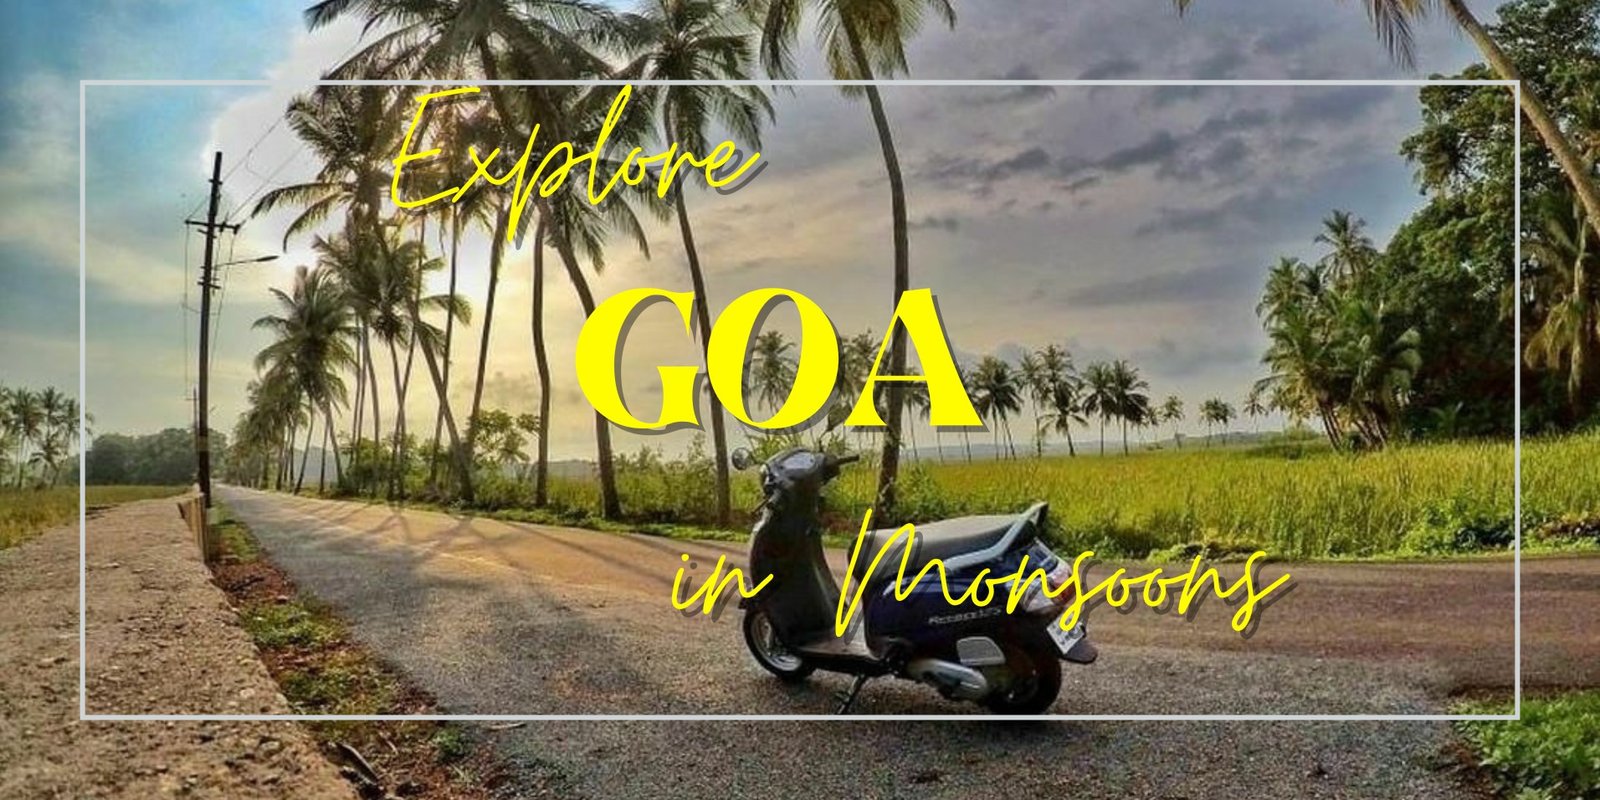 Offbeat Things to do in Goa during Monsoons